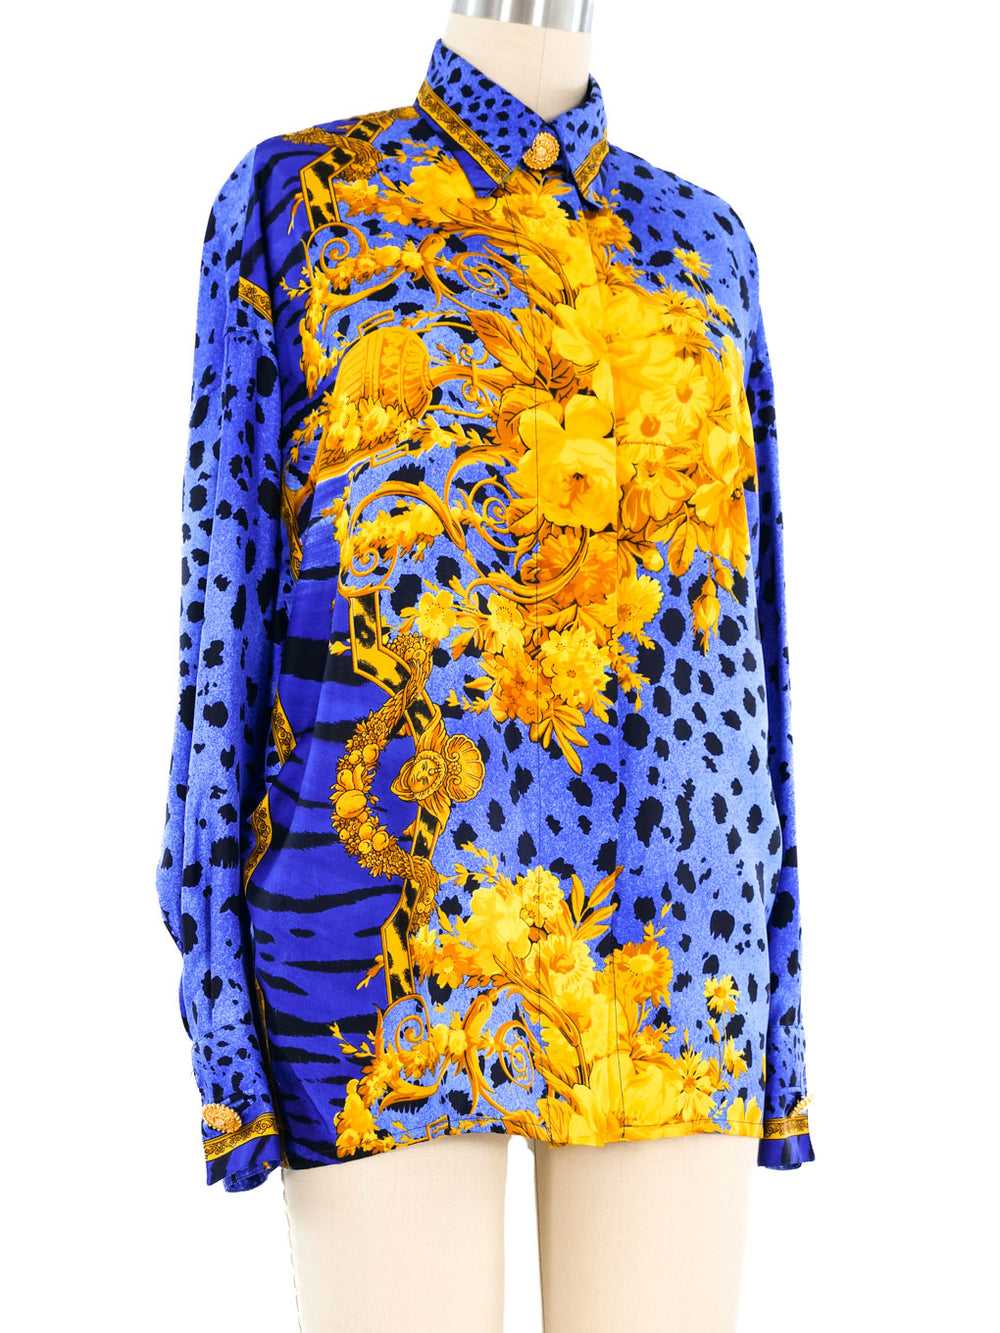 Gianni Versace Couture Baroque Printed Silk Blouse - image 4